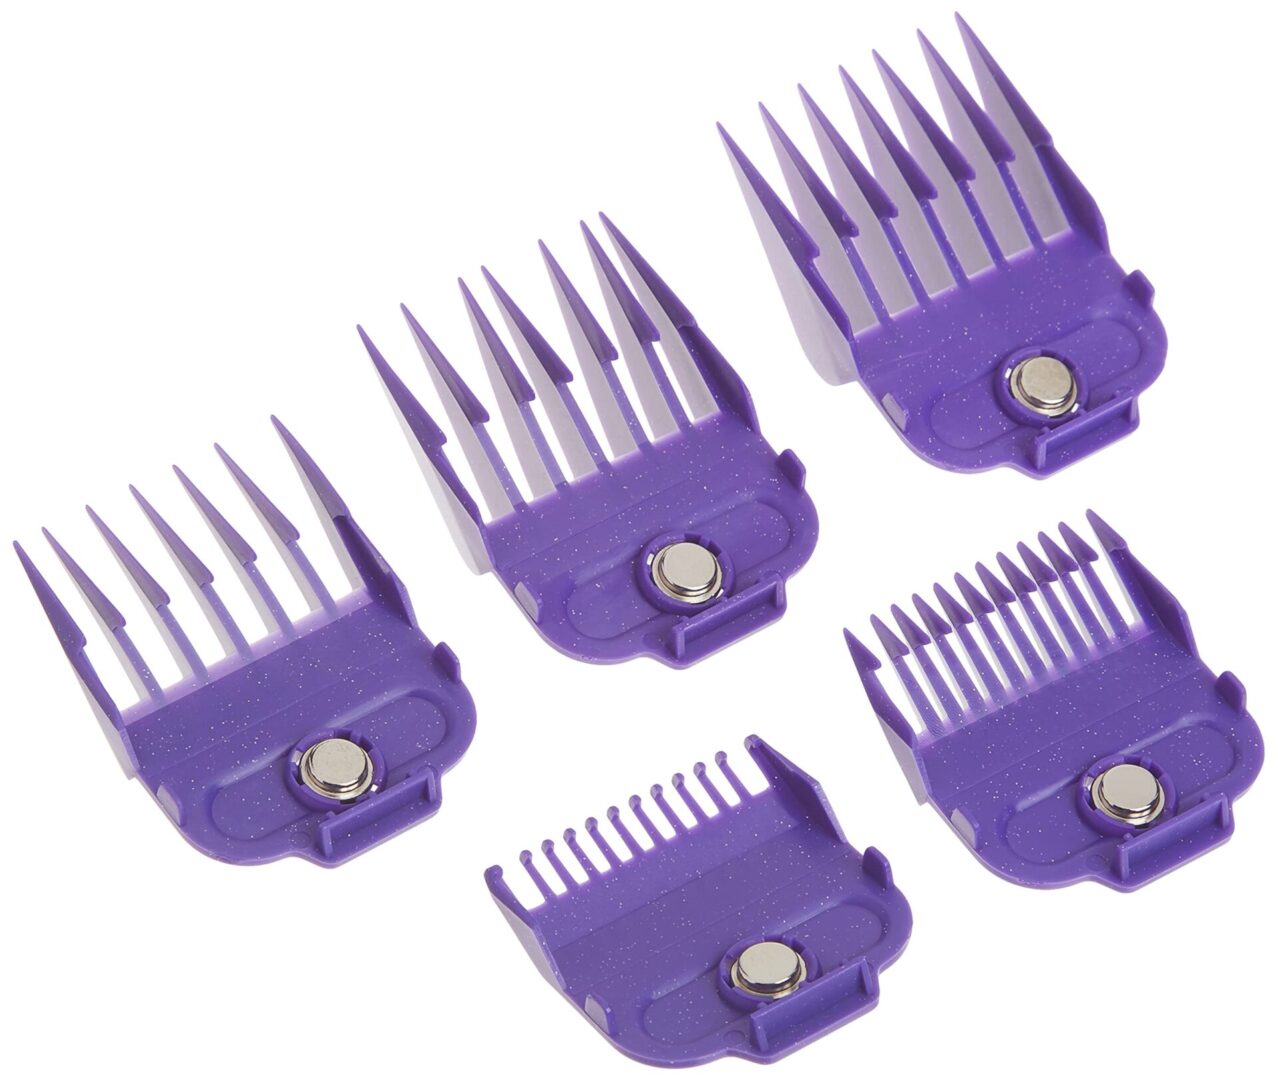 A set of purple hair clippers with different sizes.